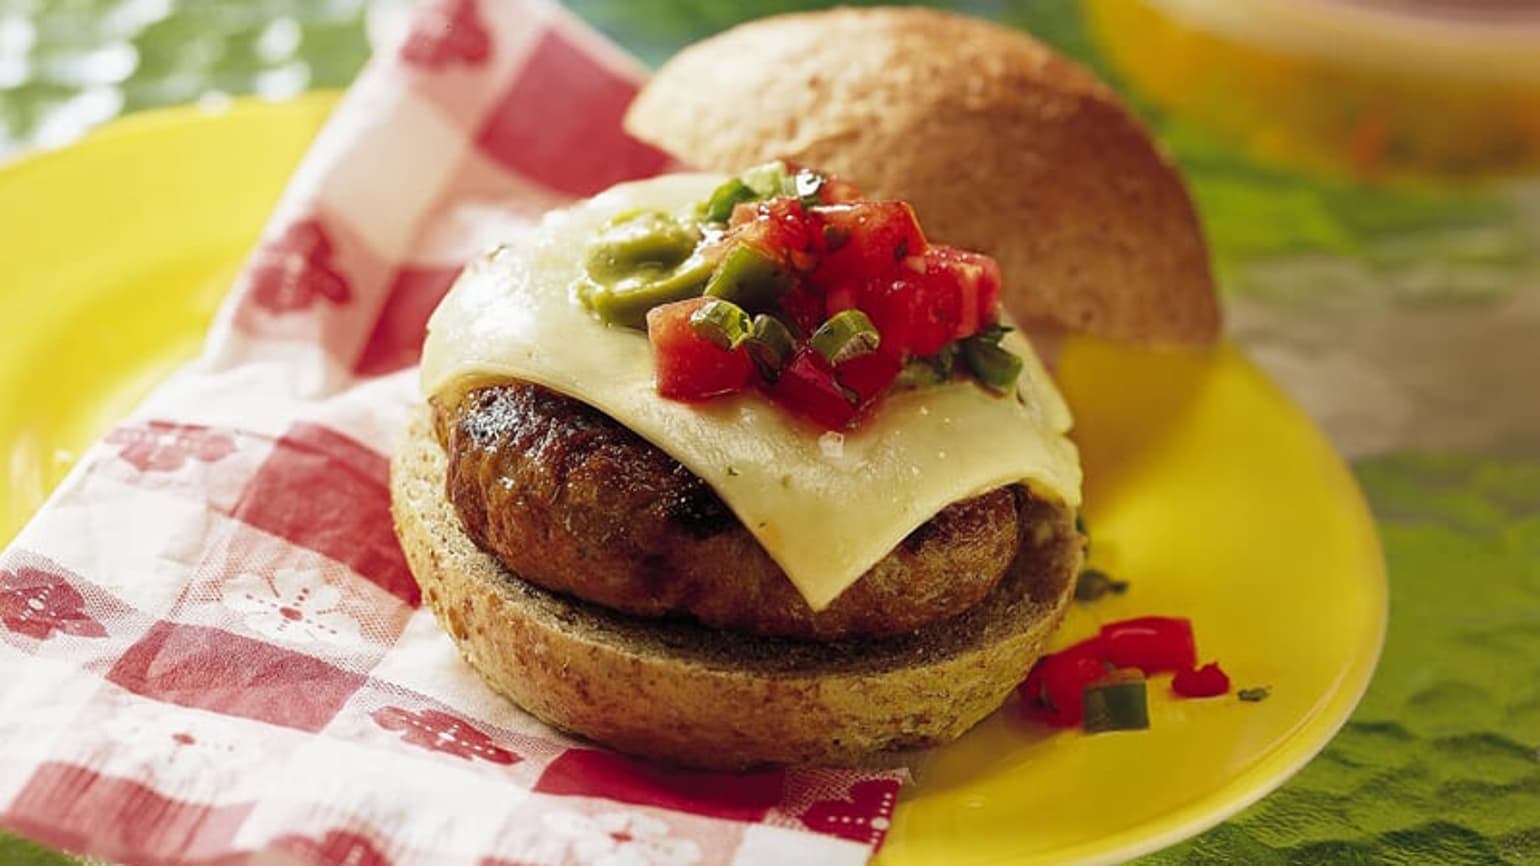 Grilled Mexican Chicken Burgers